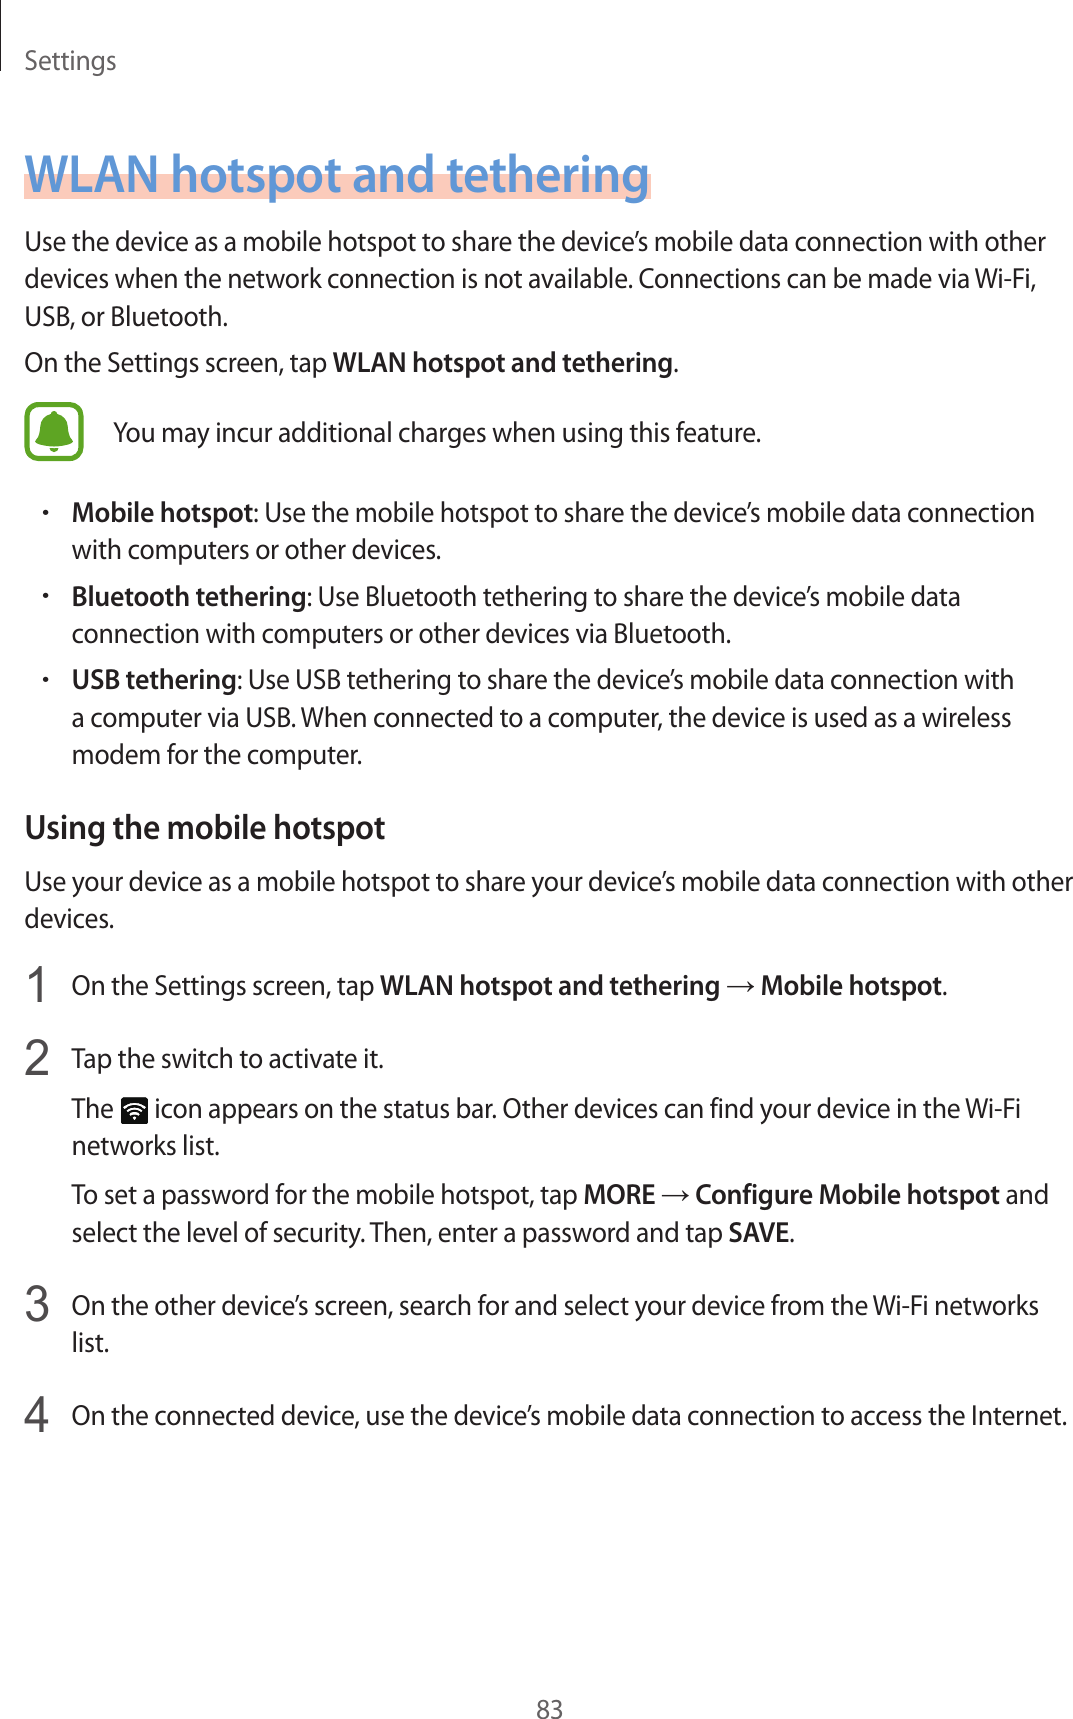 Settings83WLAN hotspot and tetheringUse the device as a mobile hotspot to share the device’s mobile data connection with other devices when the network connection is not available. Connections can be made via Wi-Fi, USB, or Bluetooth.On the Settings screen, tap WLAN hotspot and tethering.You may incur additional charges when using this feature.•Mobile hotspot: Use the mobile hotspot to share the device’s mobile data connection with computers or other devices.•Bluetooth tethering: Use Bluetooth tethering to share the device’s mobile data connection with computers or other devices via Bluetooth.•USB tethering: Use USB tethering to share the device’s mobile data connection with a computer via USB. When connected to a computer, the device is used as a wireless modem for the computer.Using the mobile hotspotUse your device as a mobile hotspot to share your device’s mobile data connection with other devices.1  On the Settings screen, tap WLAN hotspot and tethering → Mobile hotspot.2  Tap the switch to activate it.The   icon appears on the status bar. Other devices can find your device in the Wi-Fi networks list.To set a password for the mobile hotspot, tap MORE → Configure Mobile hotspot and select the level of security. Then, enter a password and tap SAVE.3  On the other device’s screen, search for and select your device from the Wi-Fi networks list.4  On the connected device, use the device’s mobile data connection to access the Internet.